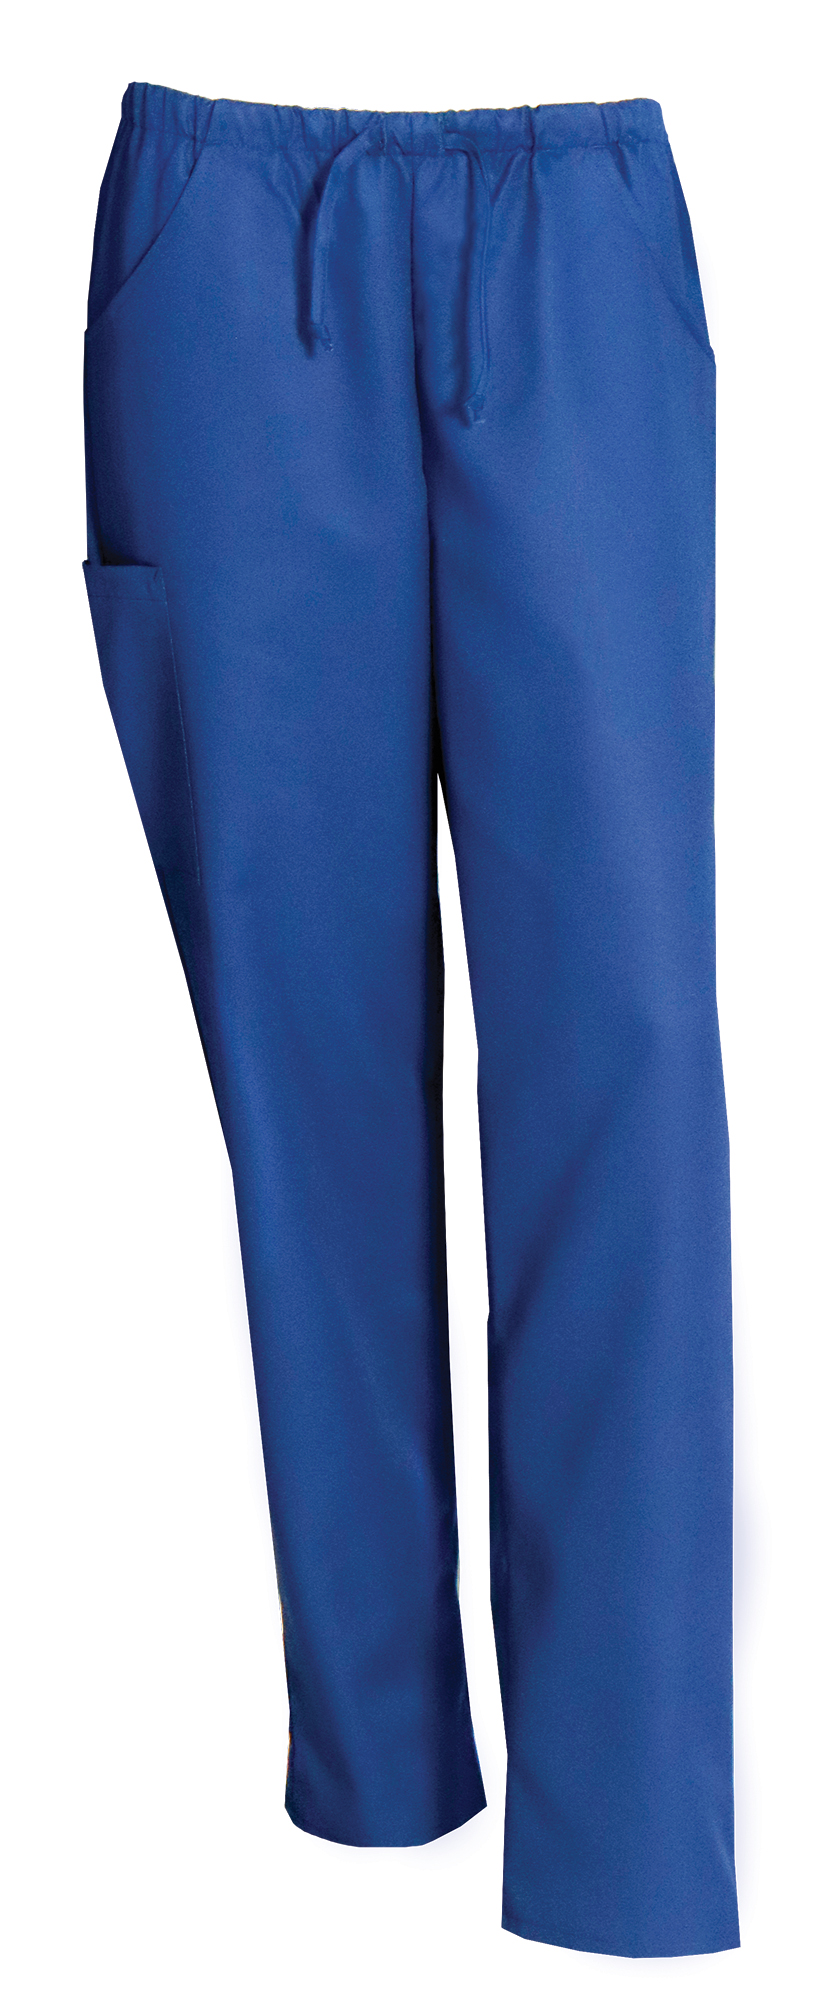 Blue Pull-on trousers, Heart (1051391)